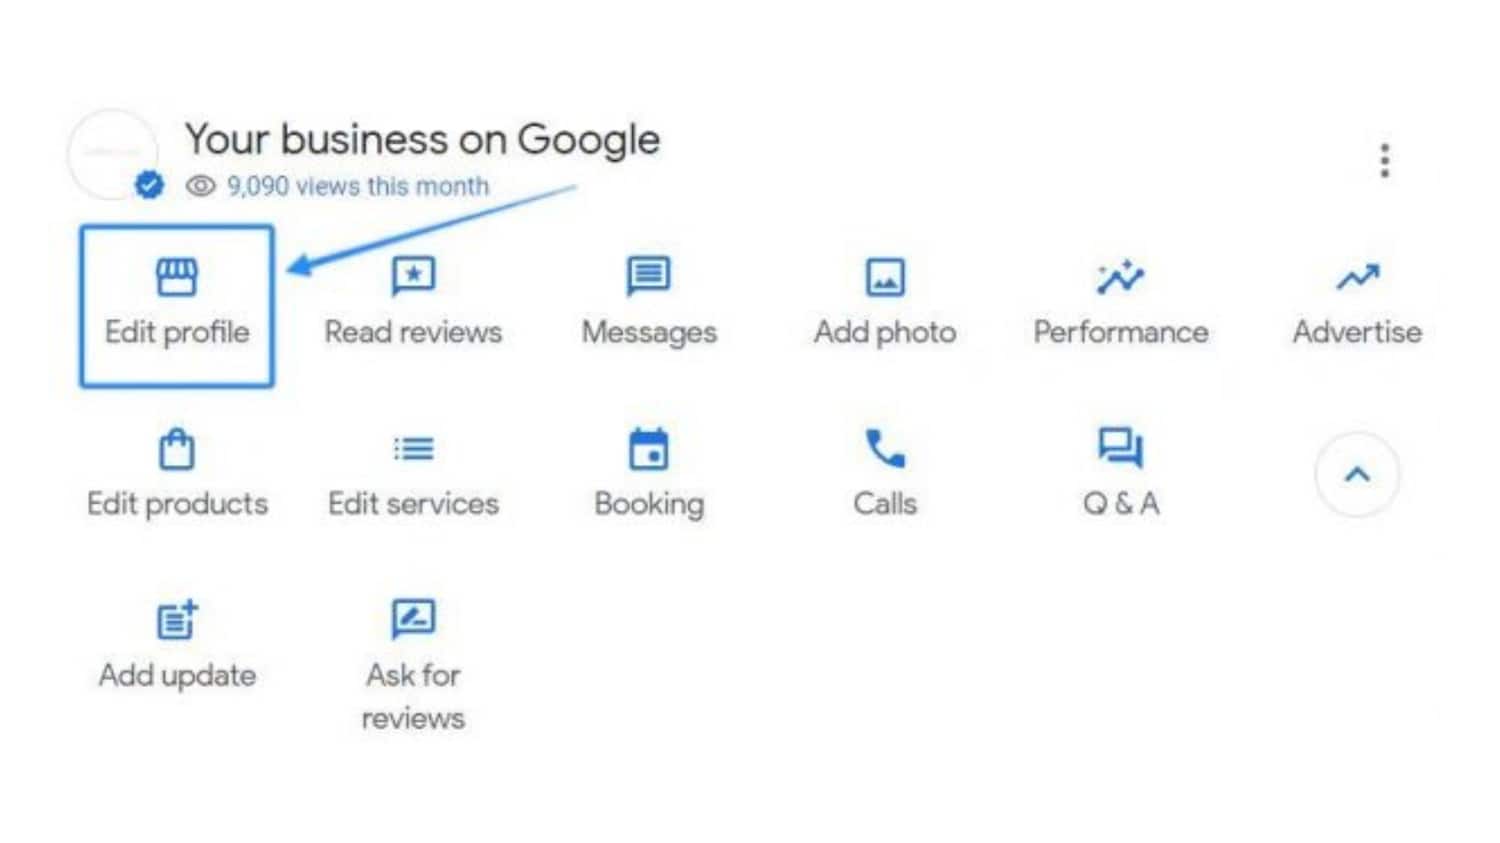 Add your social profiles to Google My Business